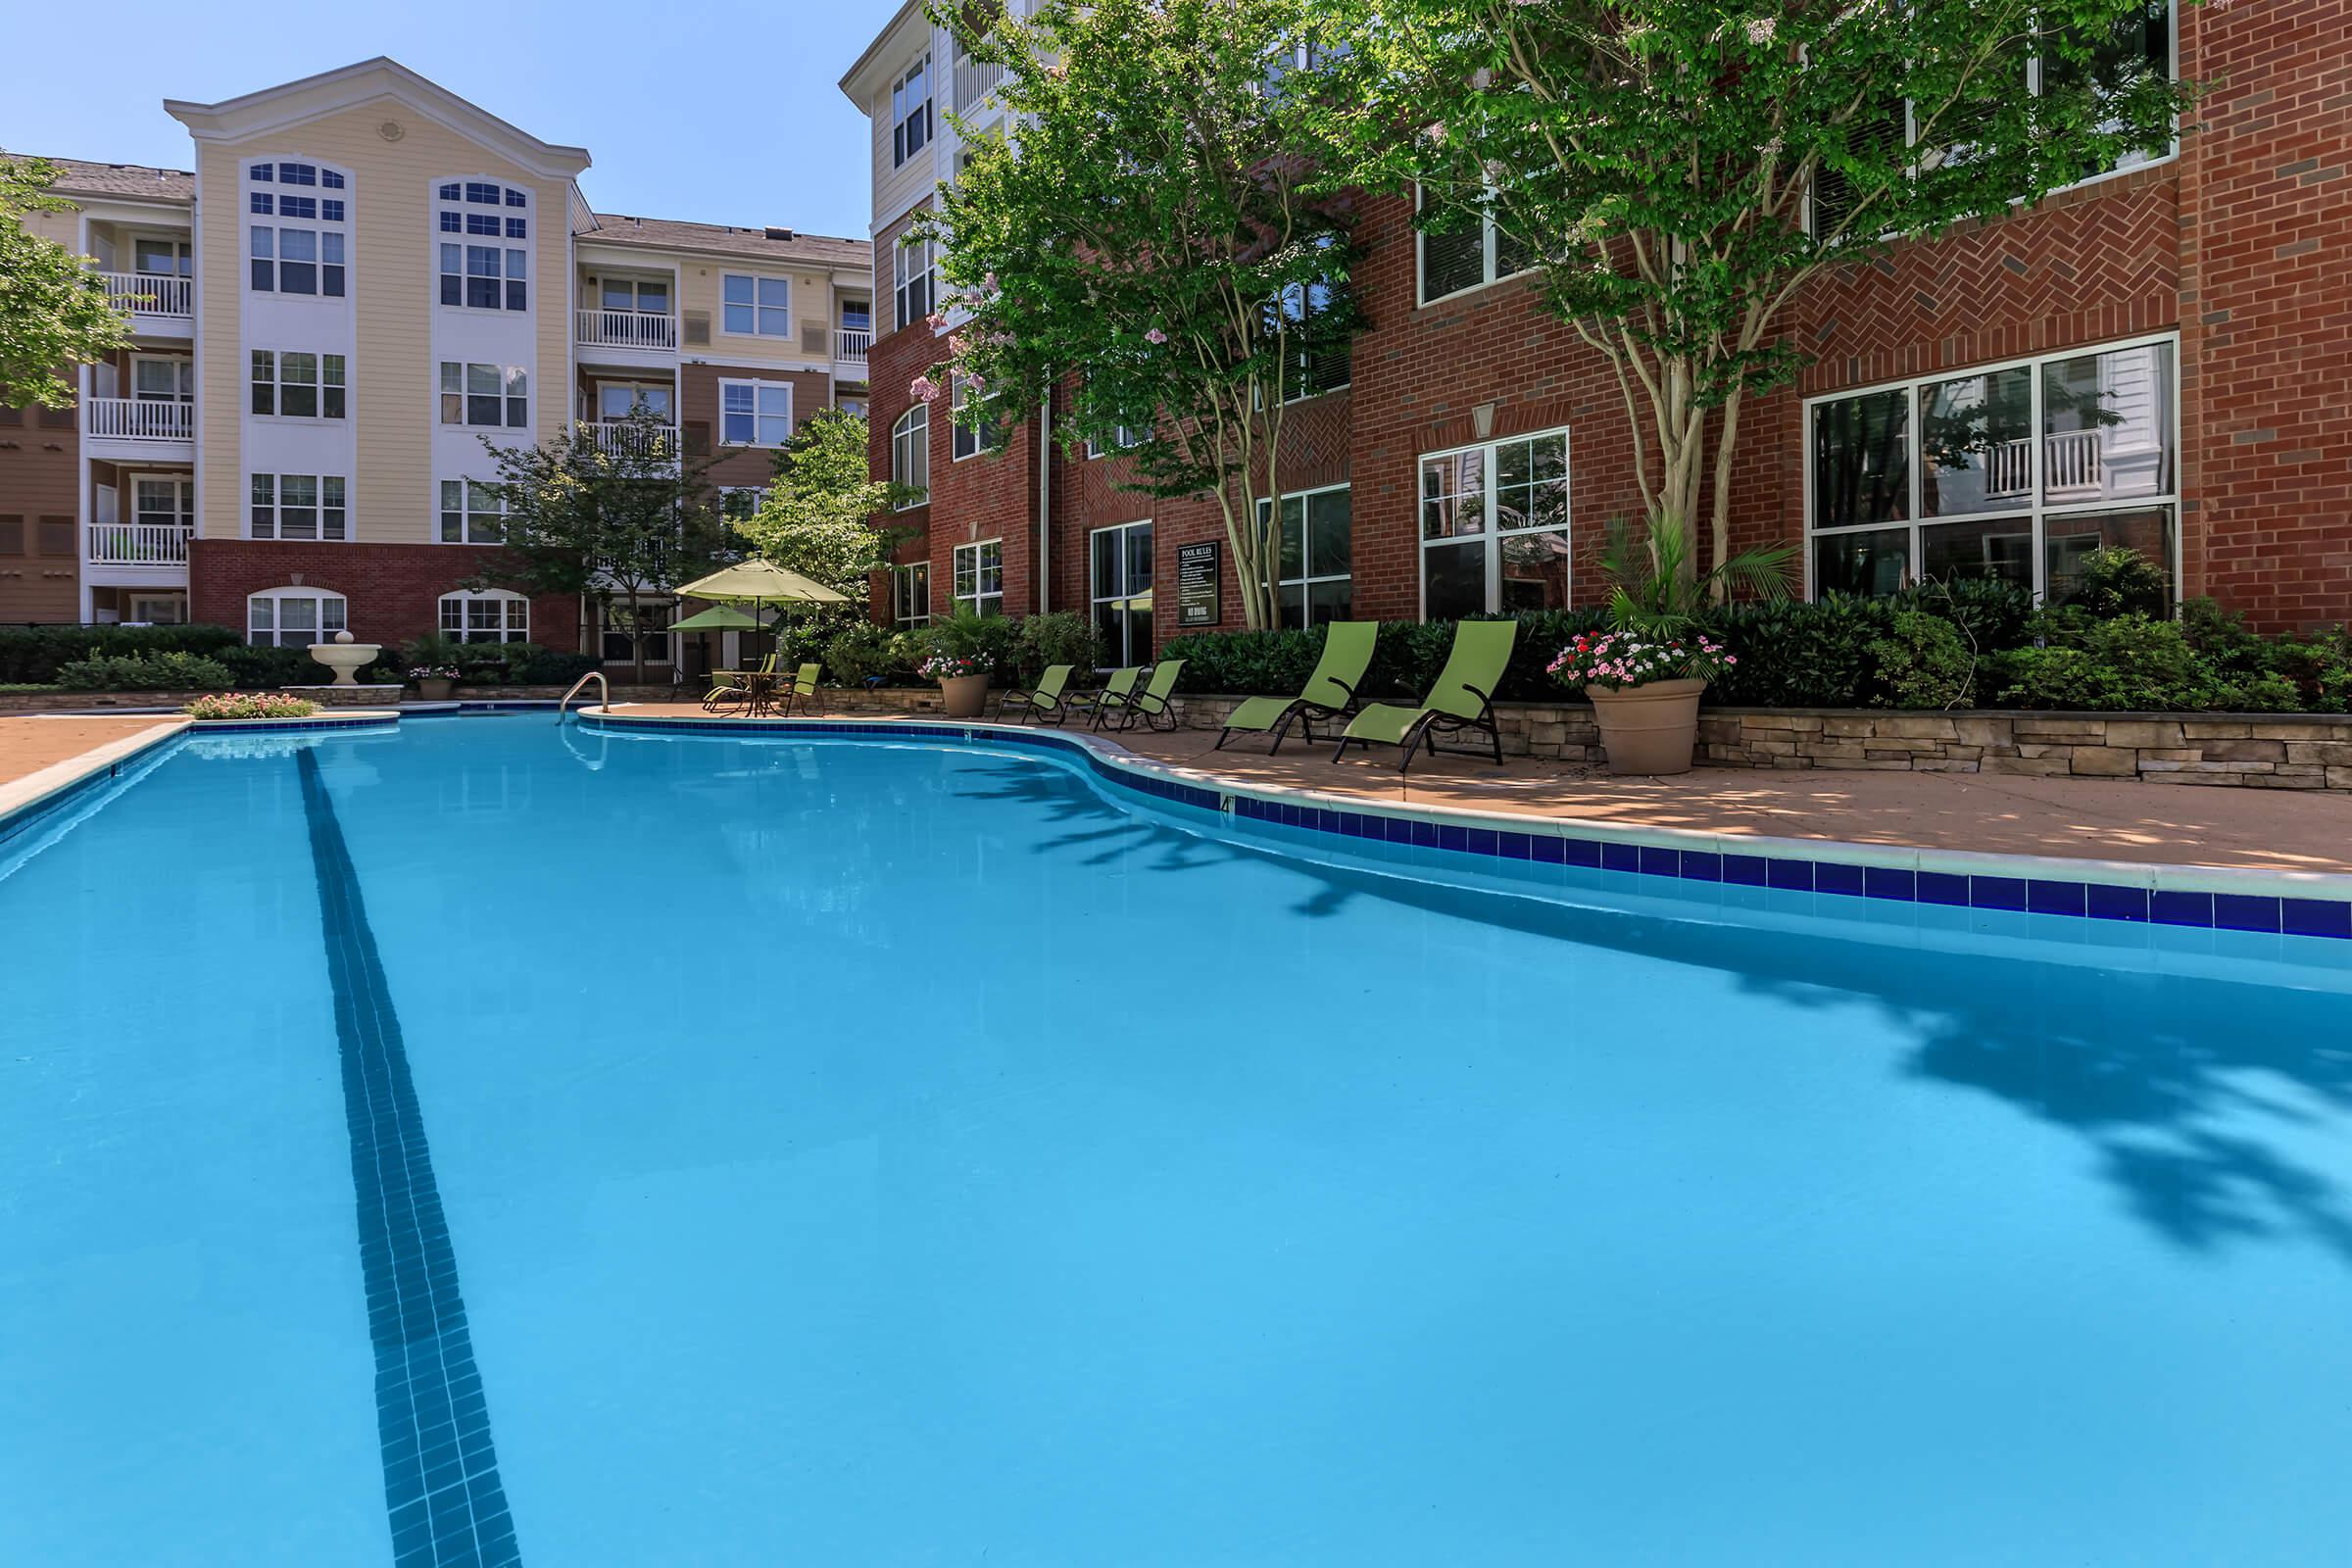 Pool at Emerson at Cherry Lane Apartments in Laurel, MD